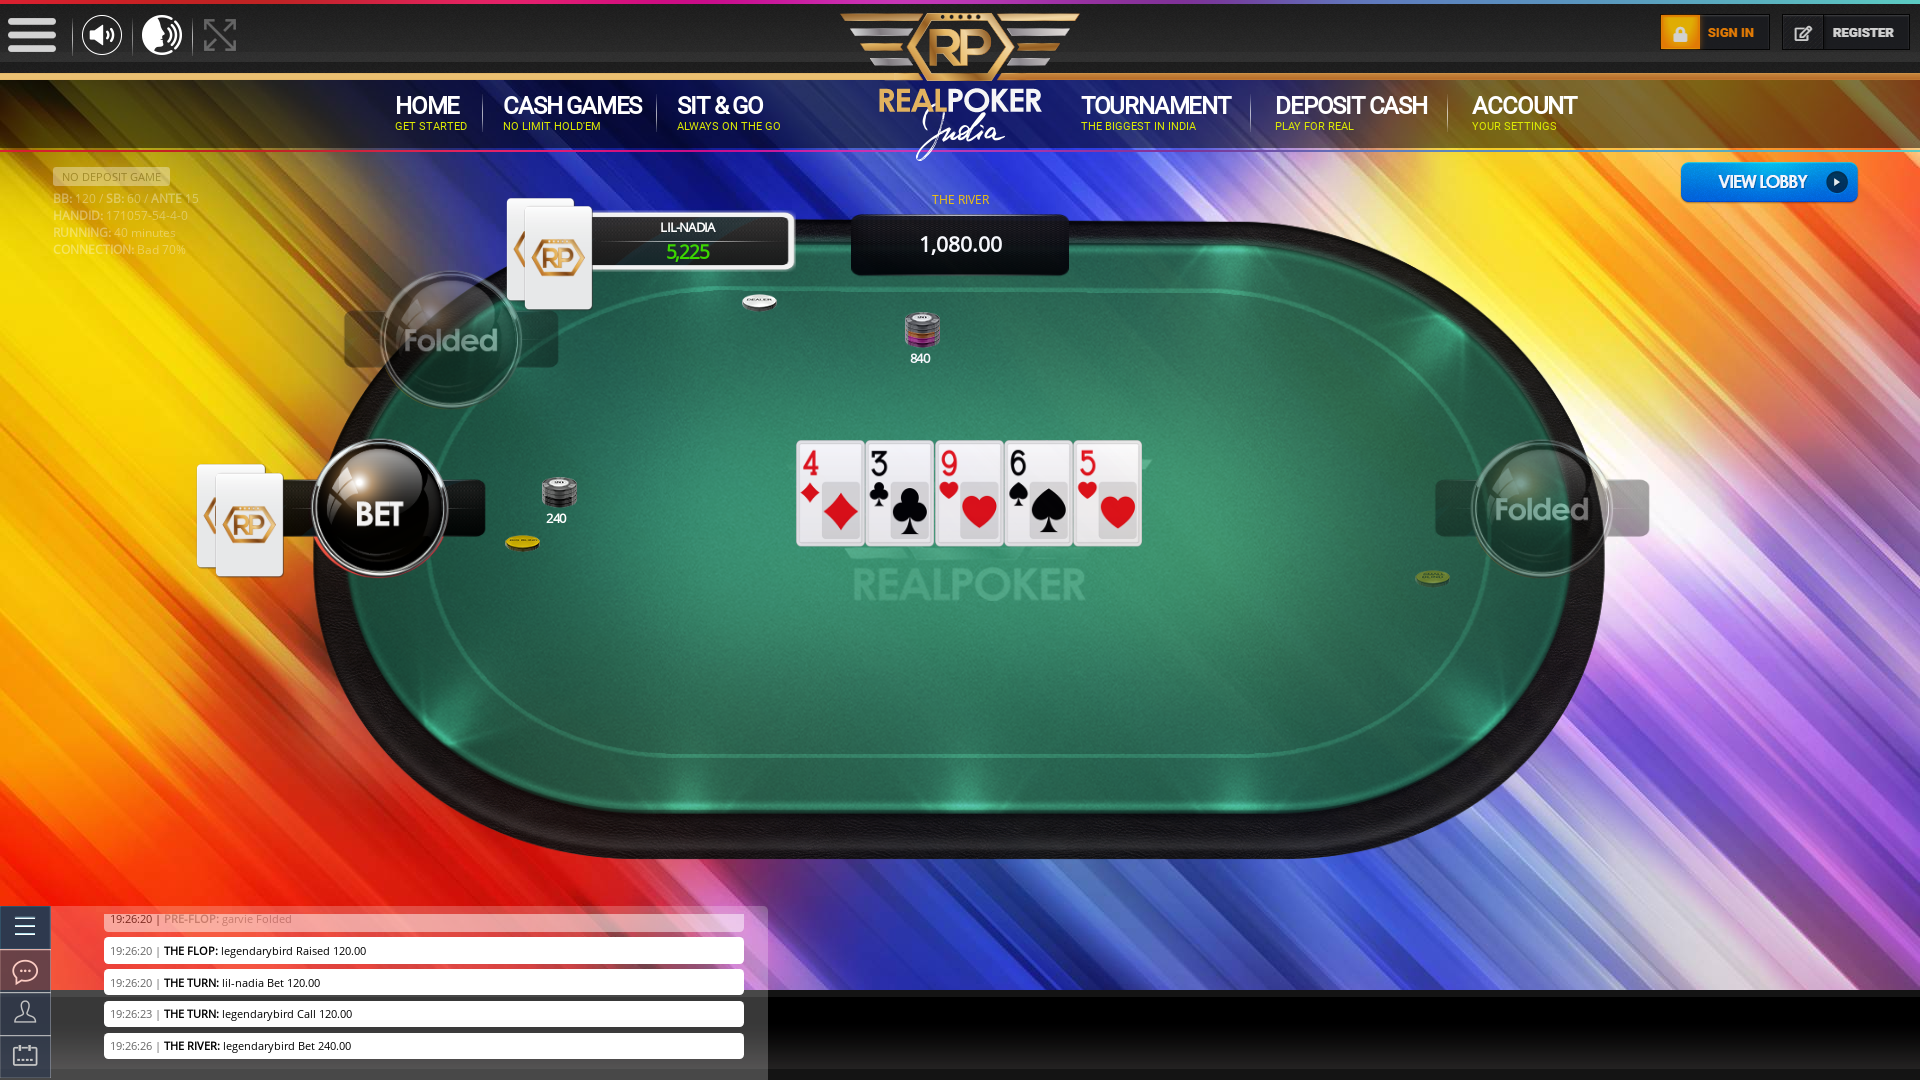 Real poker 10 player table in the 39th minute of the match